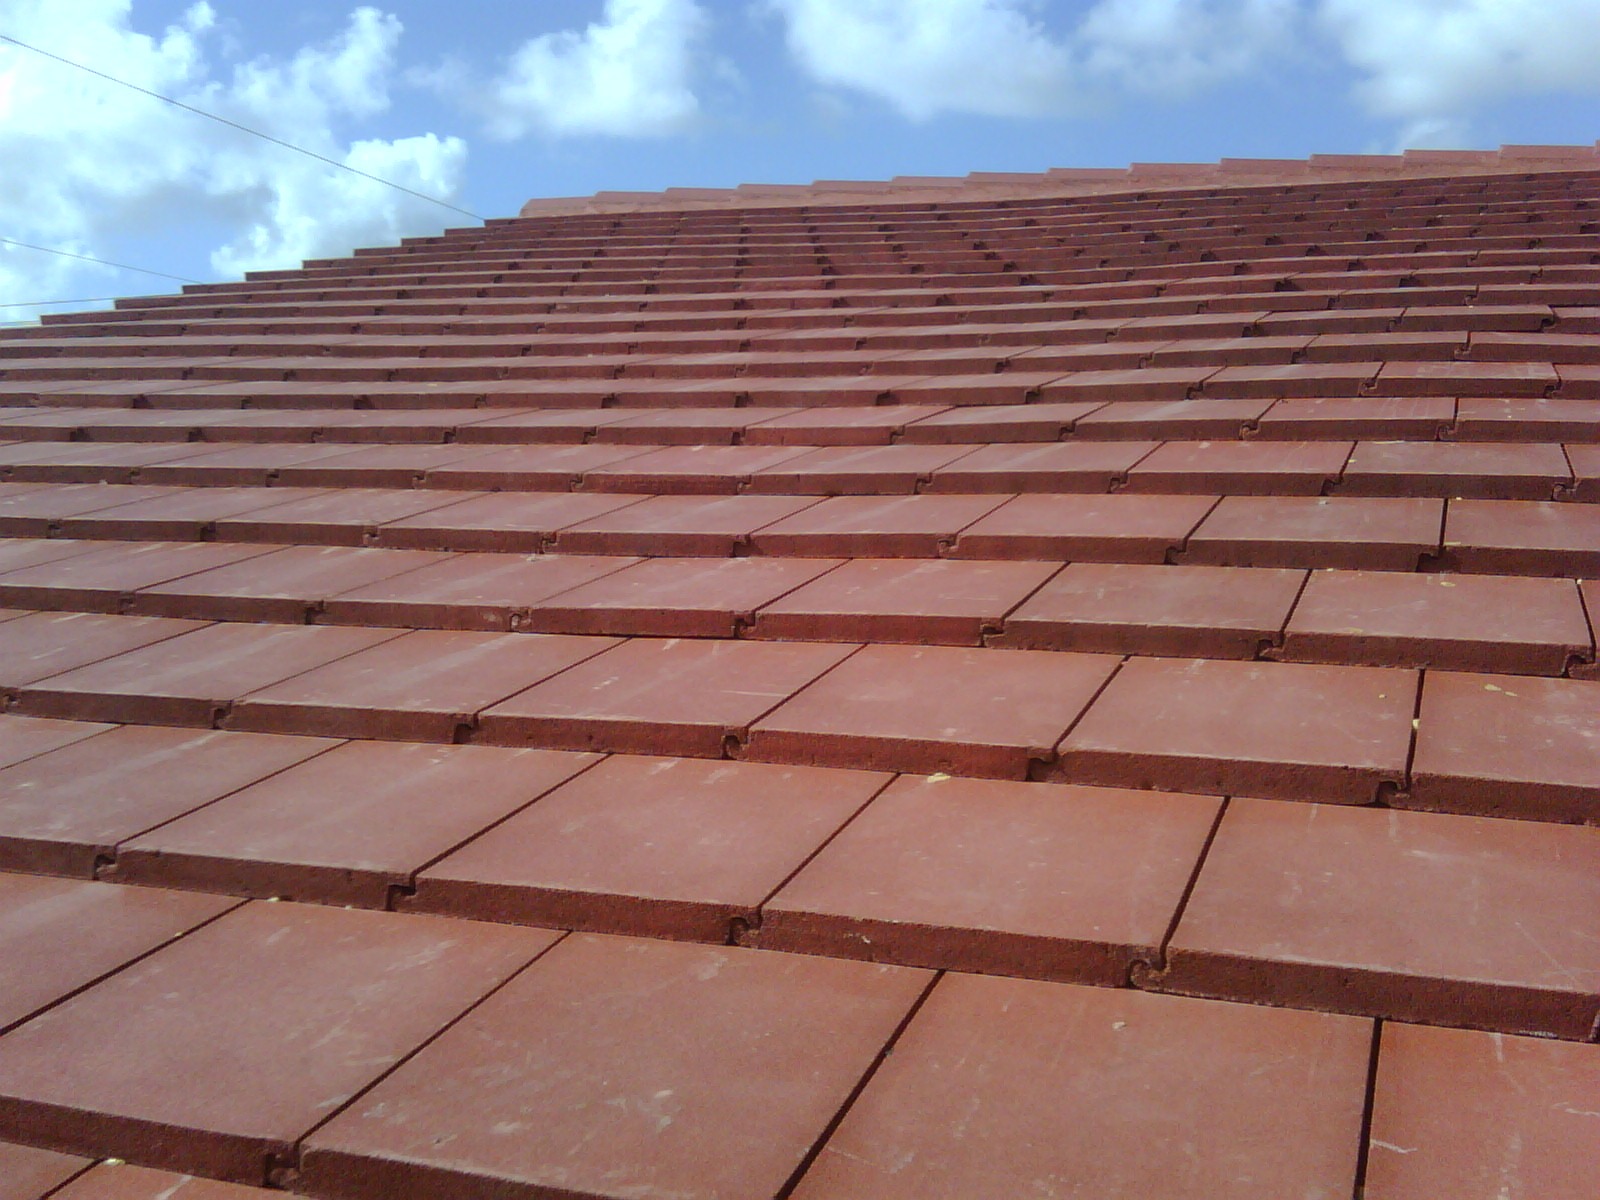 Close-up of new roof tiles